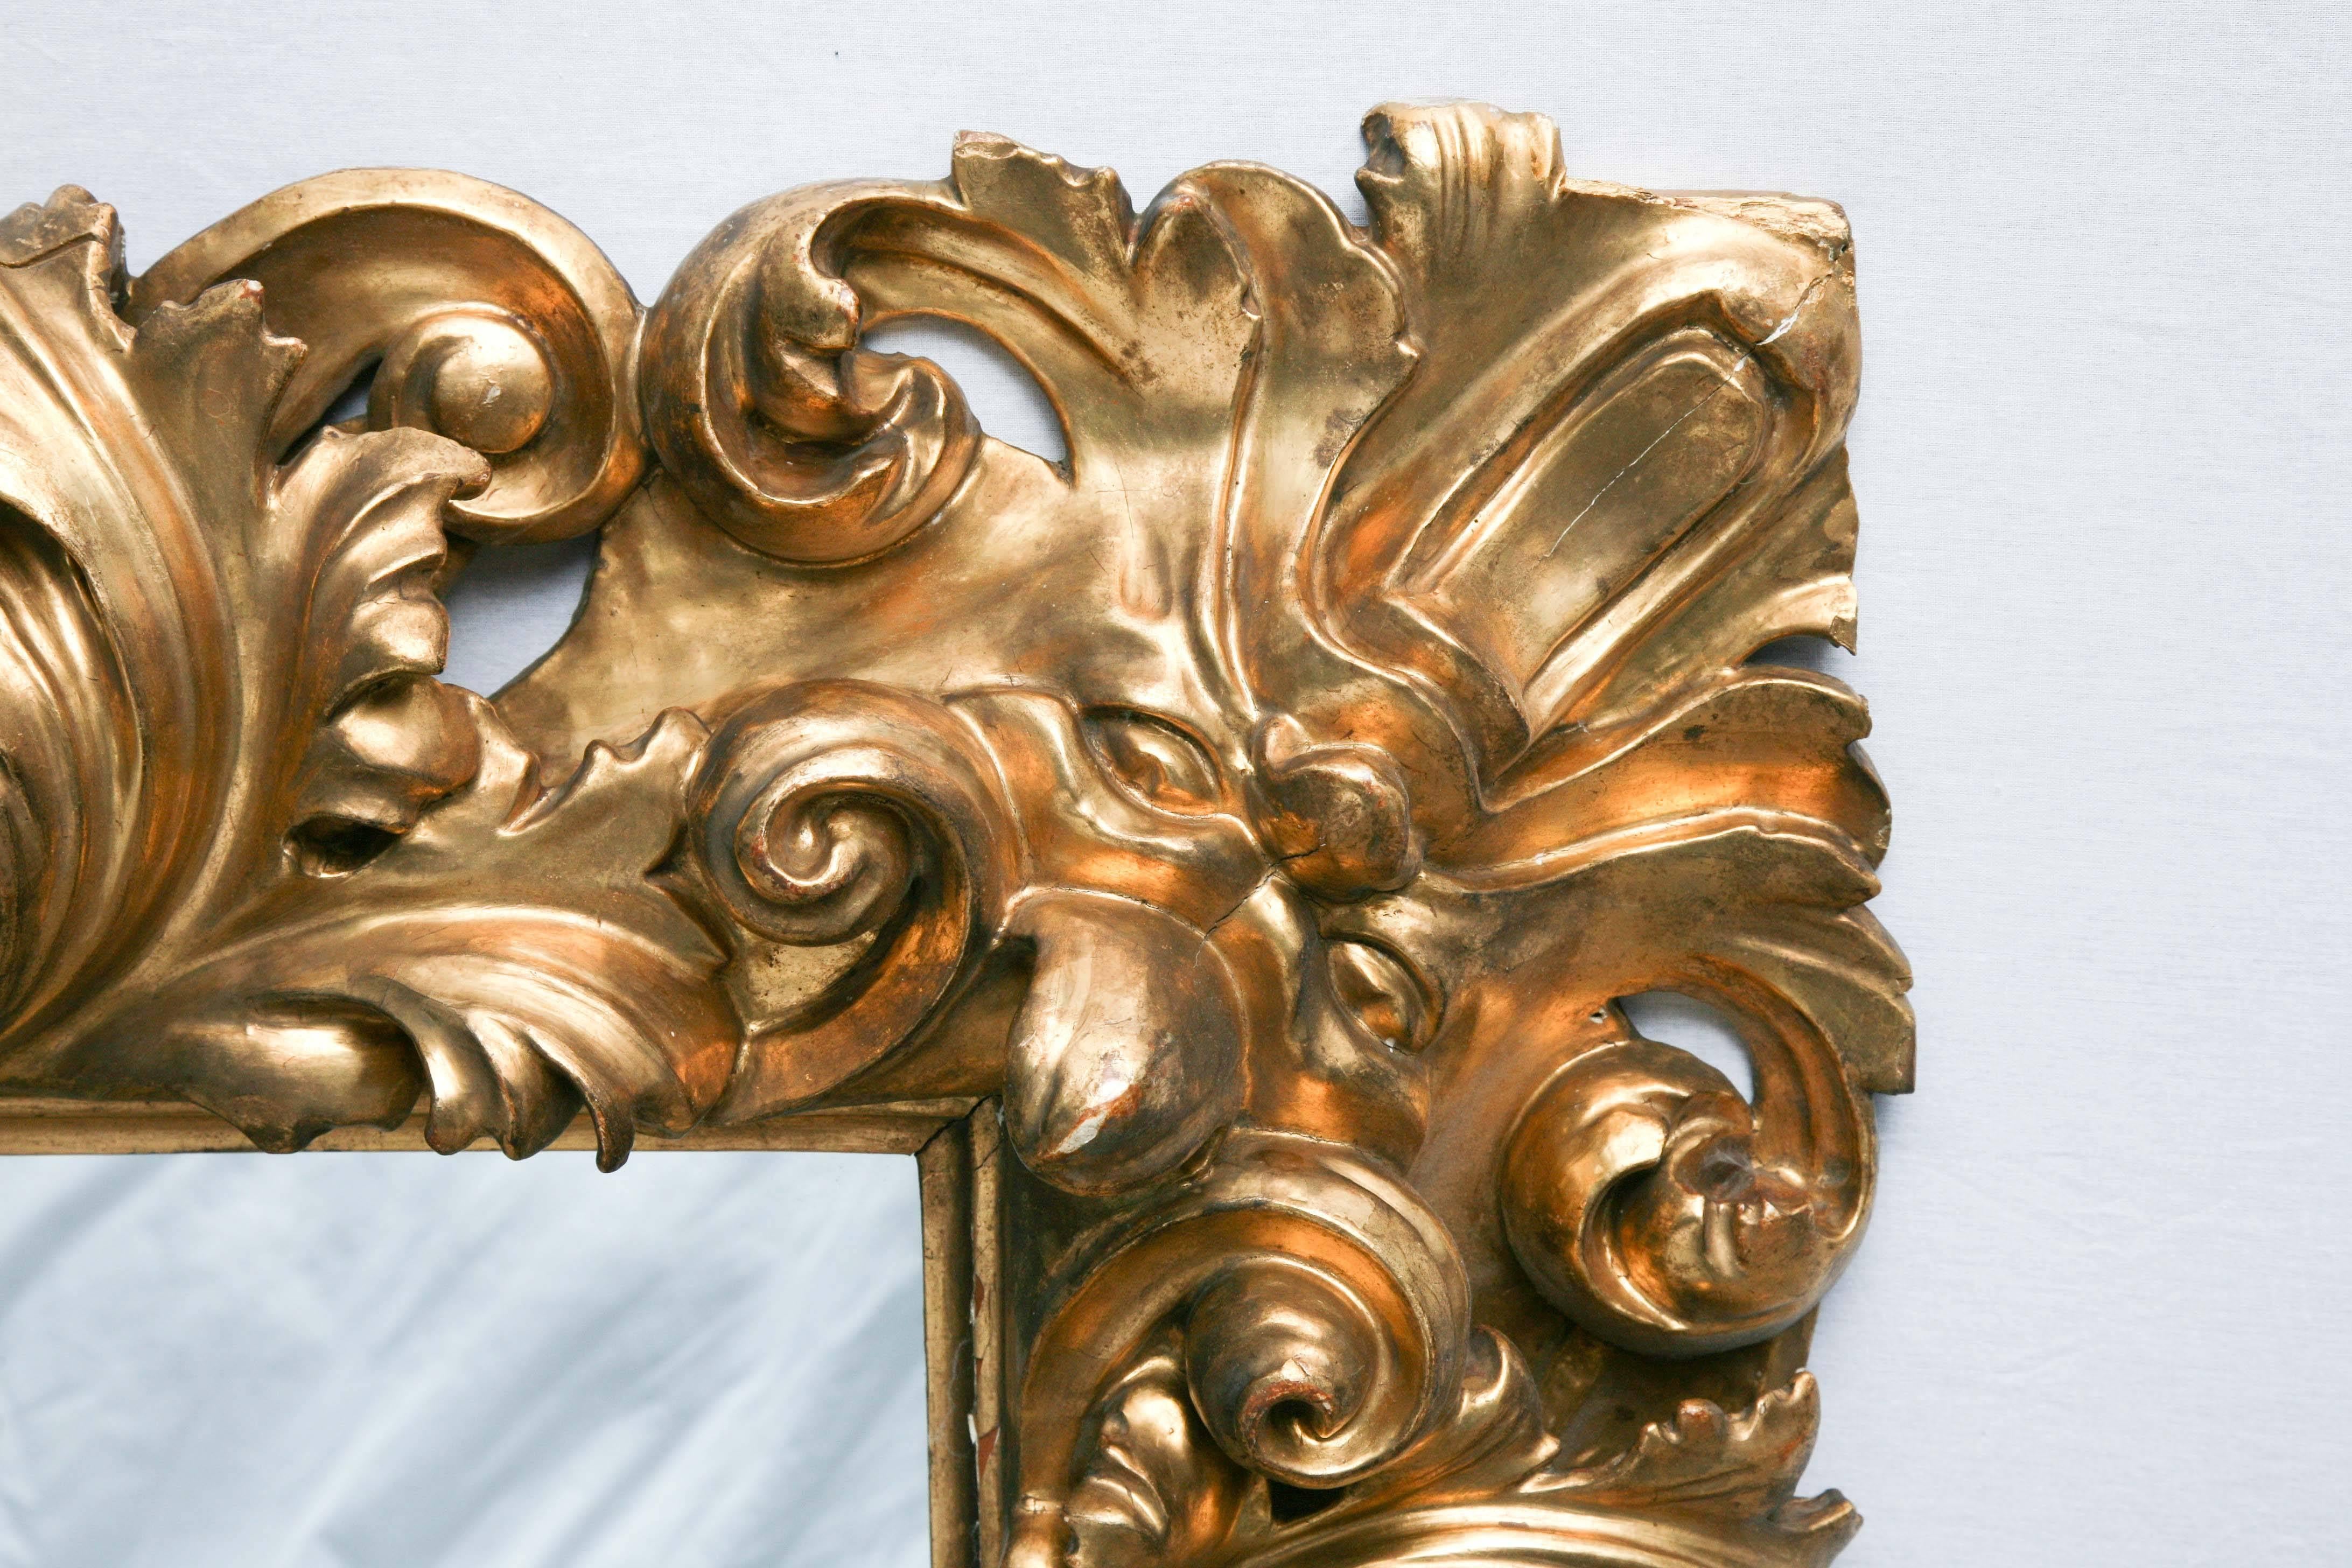 This robust giltwood from Italy is deeply carved with intricate undercuts. The corners are grotesque masques which flow directly from the foliate forms. Mannerist mirrors such as this were very popular in 18th century Italy because they reflect the